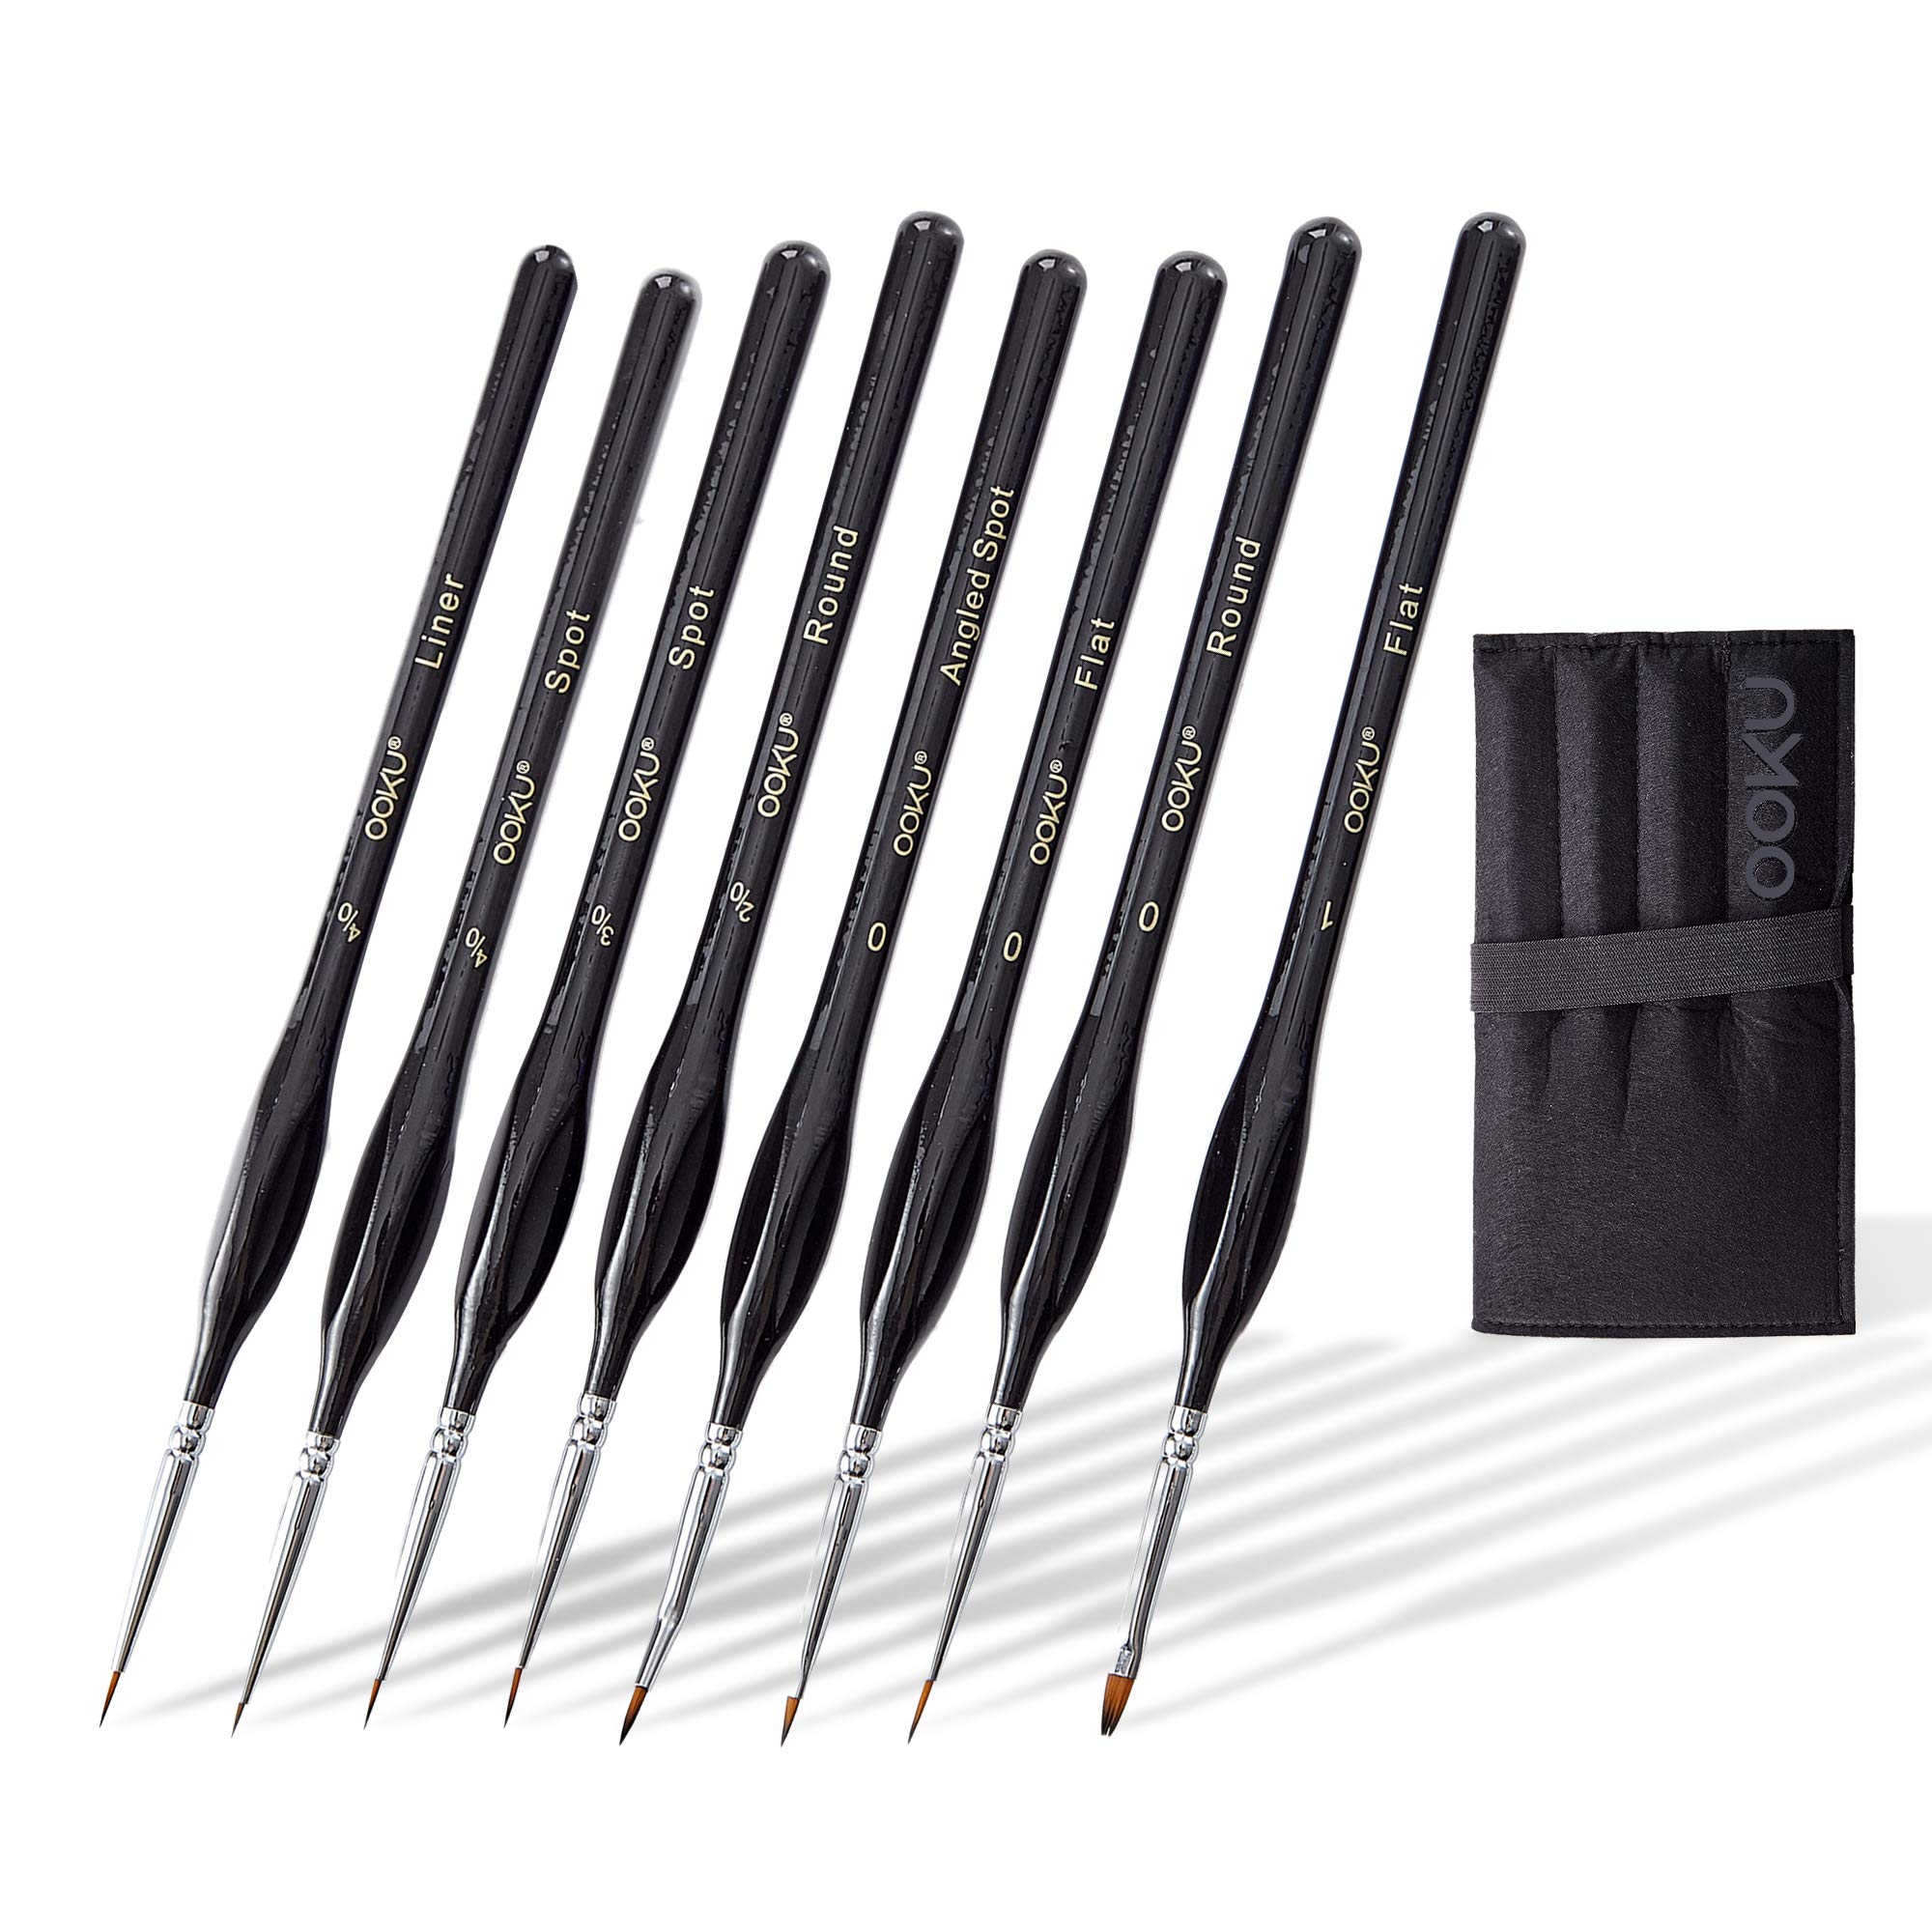 Detail Paint Brushes 9pcs Detail Brush Set For Acrylic, Watercolor, Oil,  Models, Nails Tiny Paint Brushes With Triangle Grip Handles